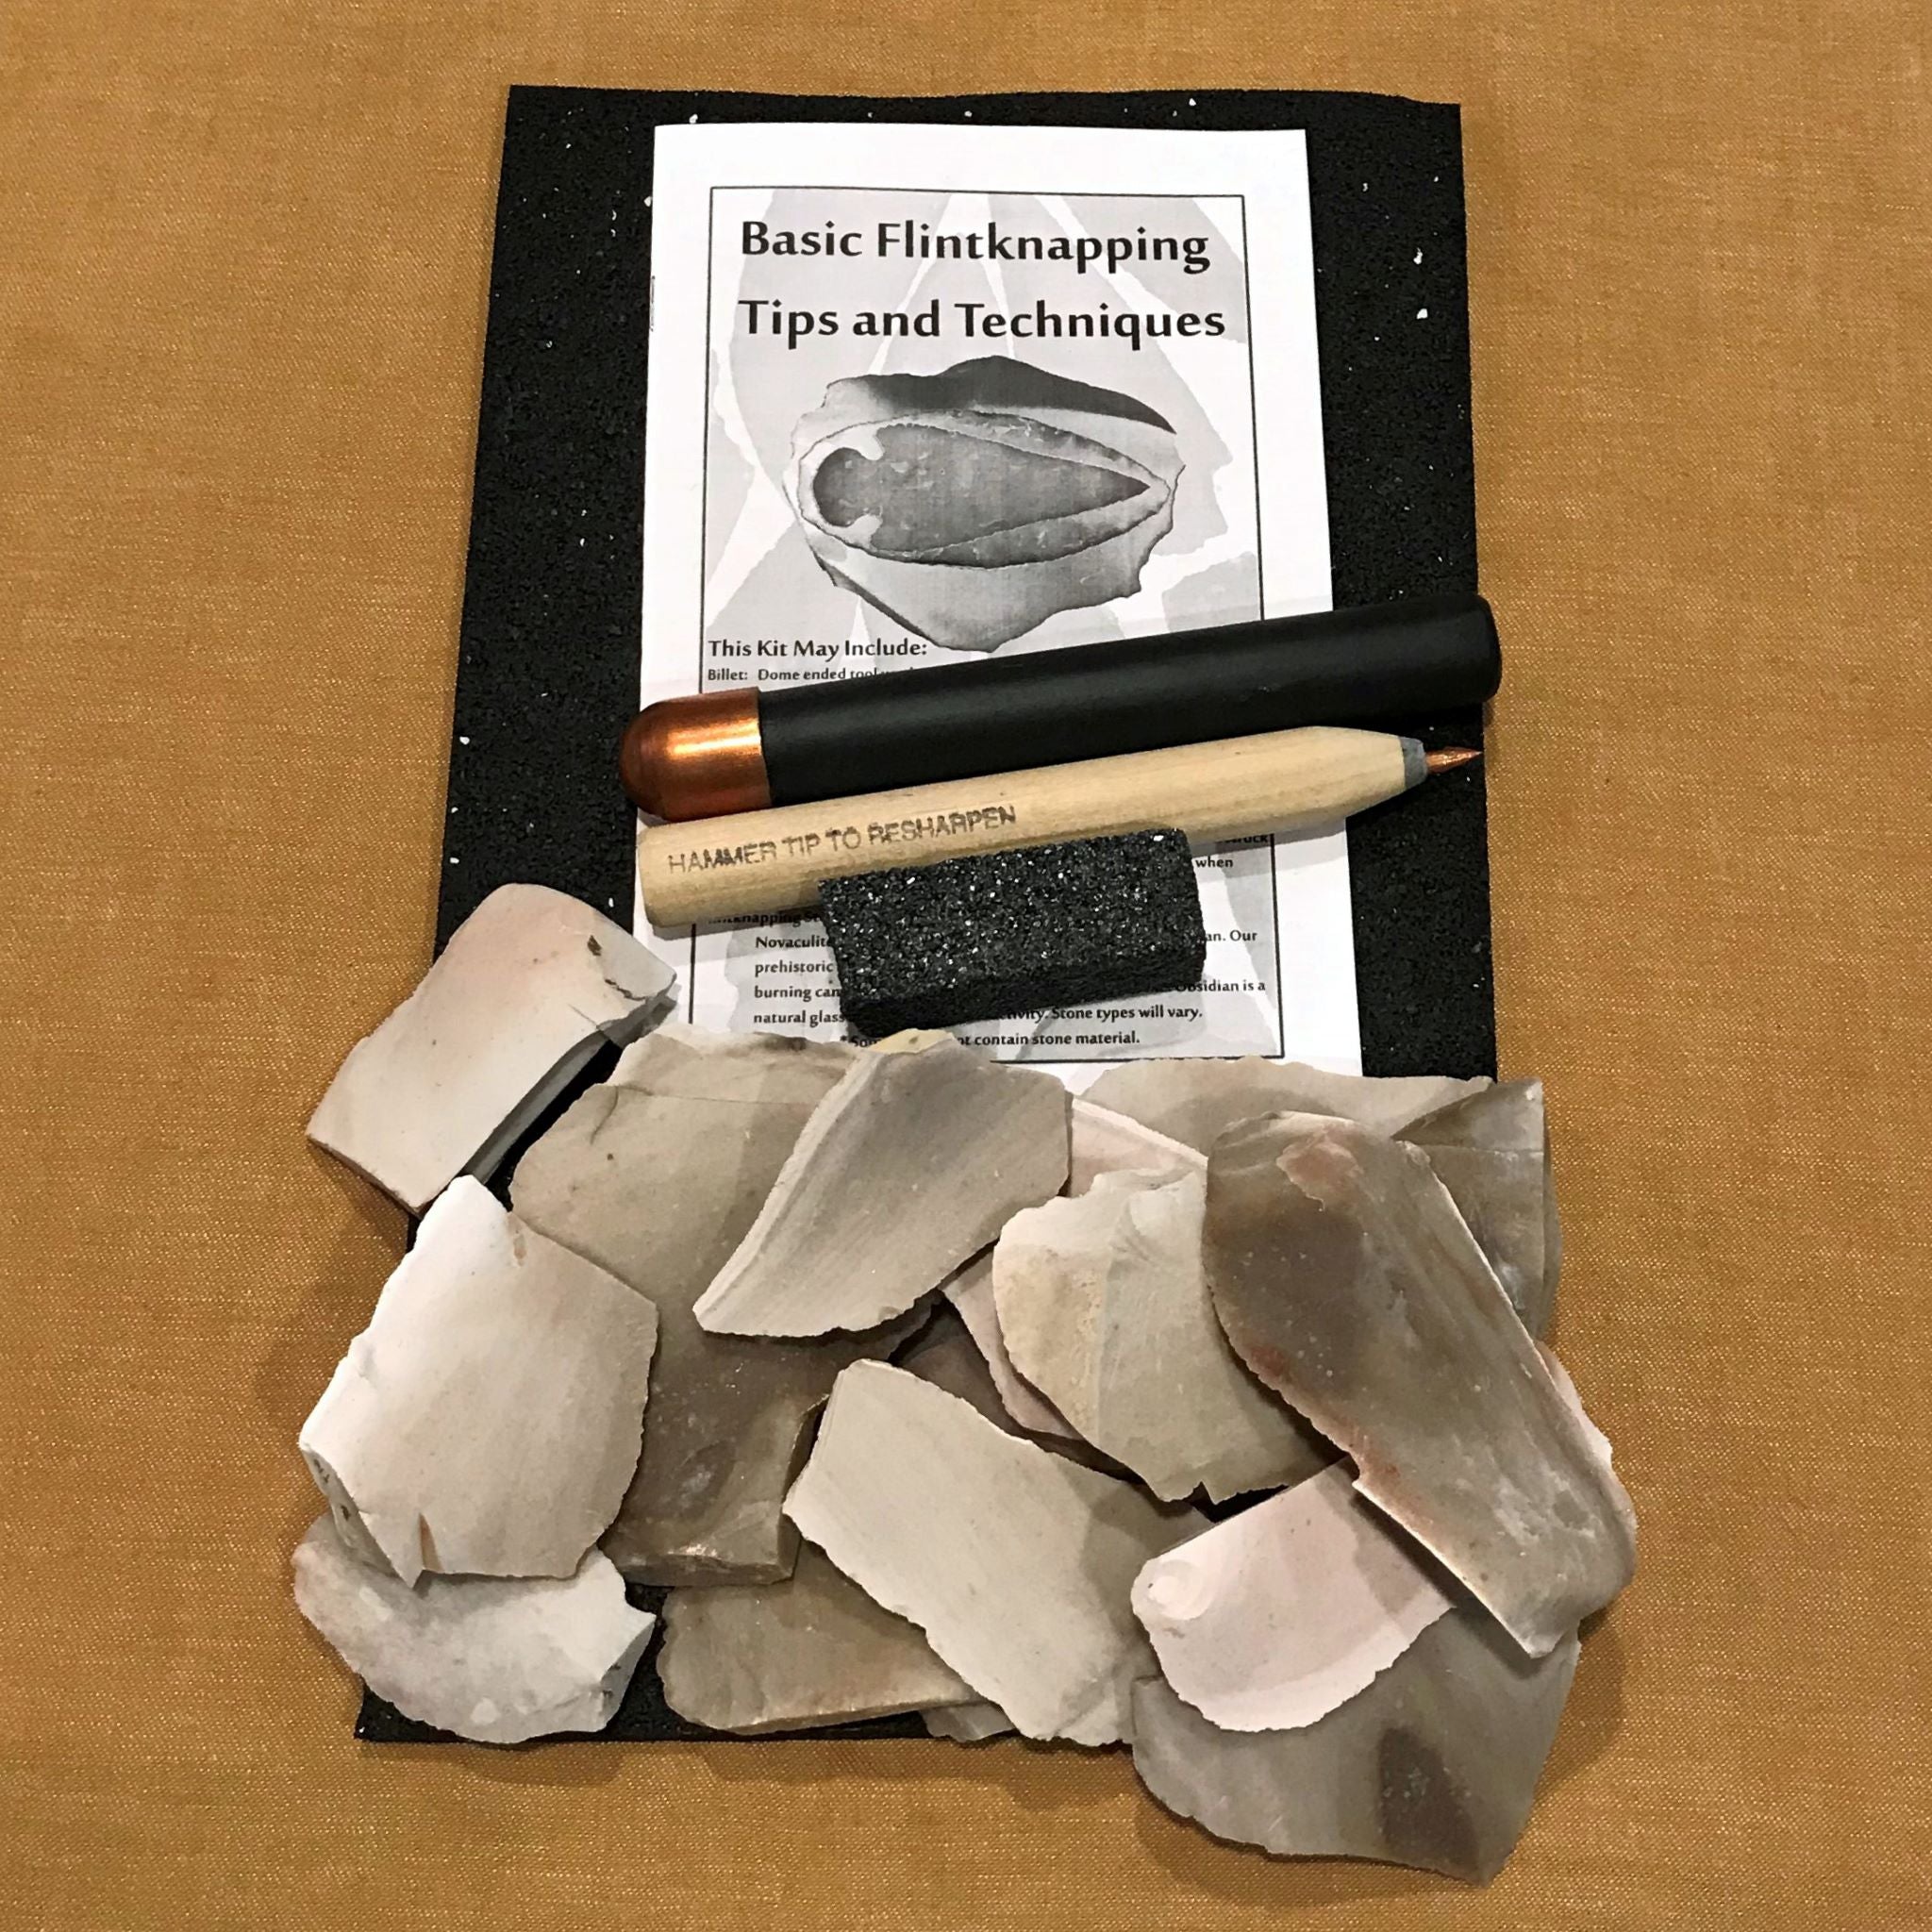 Kit contains select stone, flintknapping tools, instructions